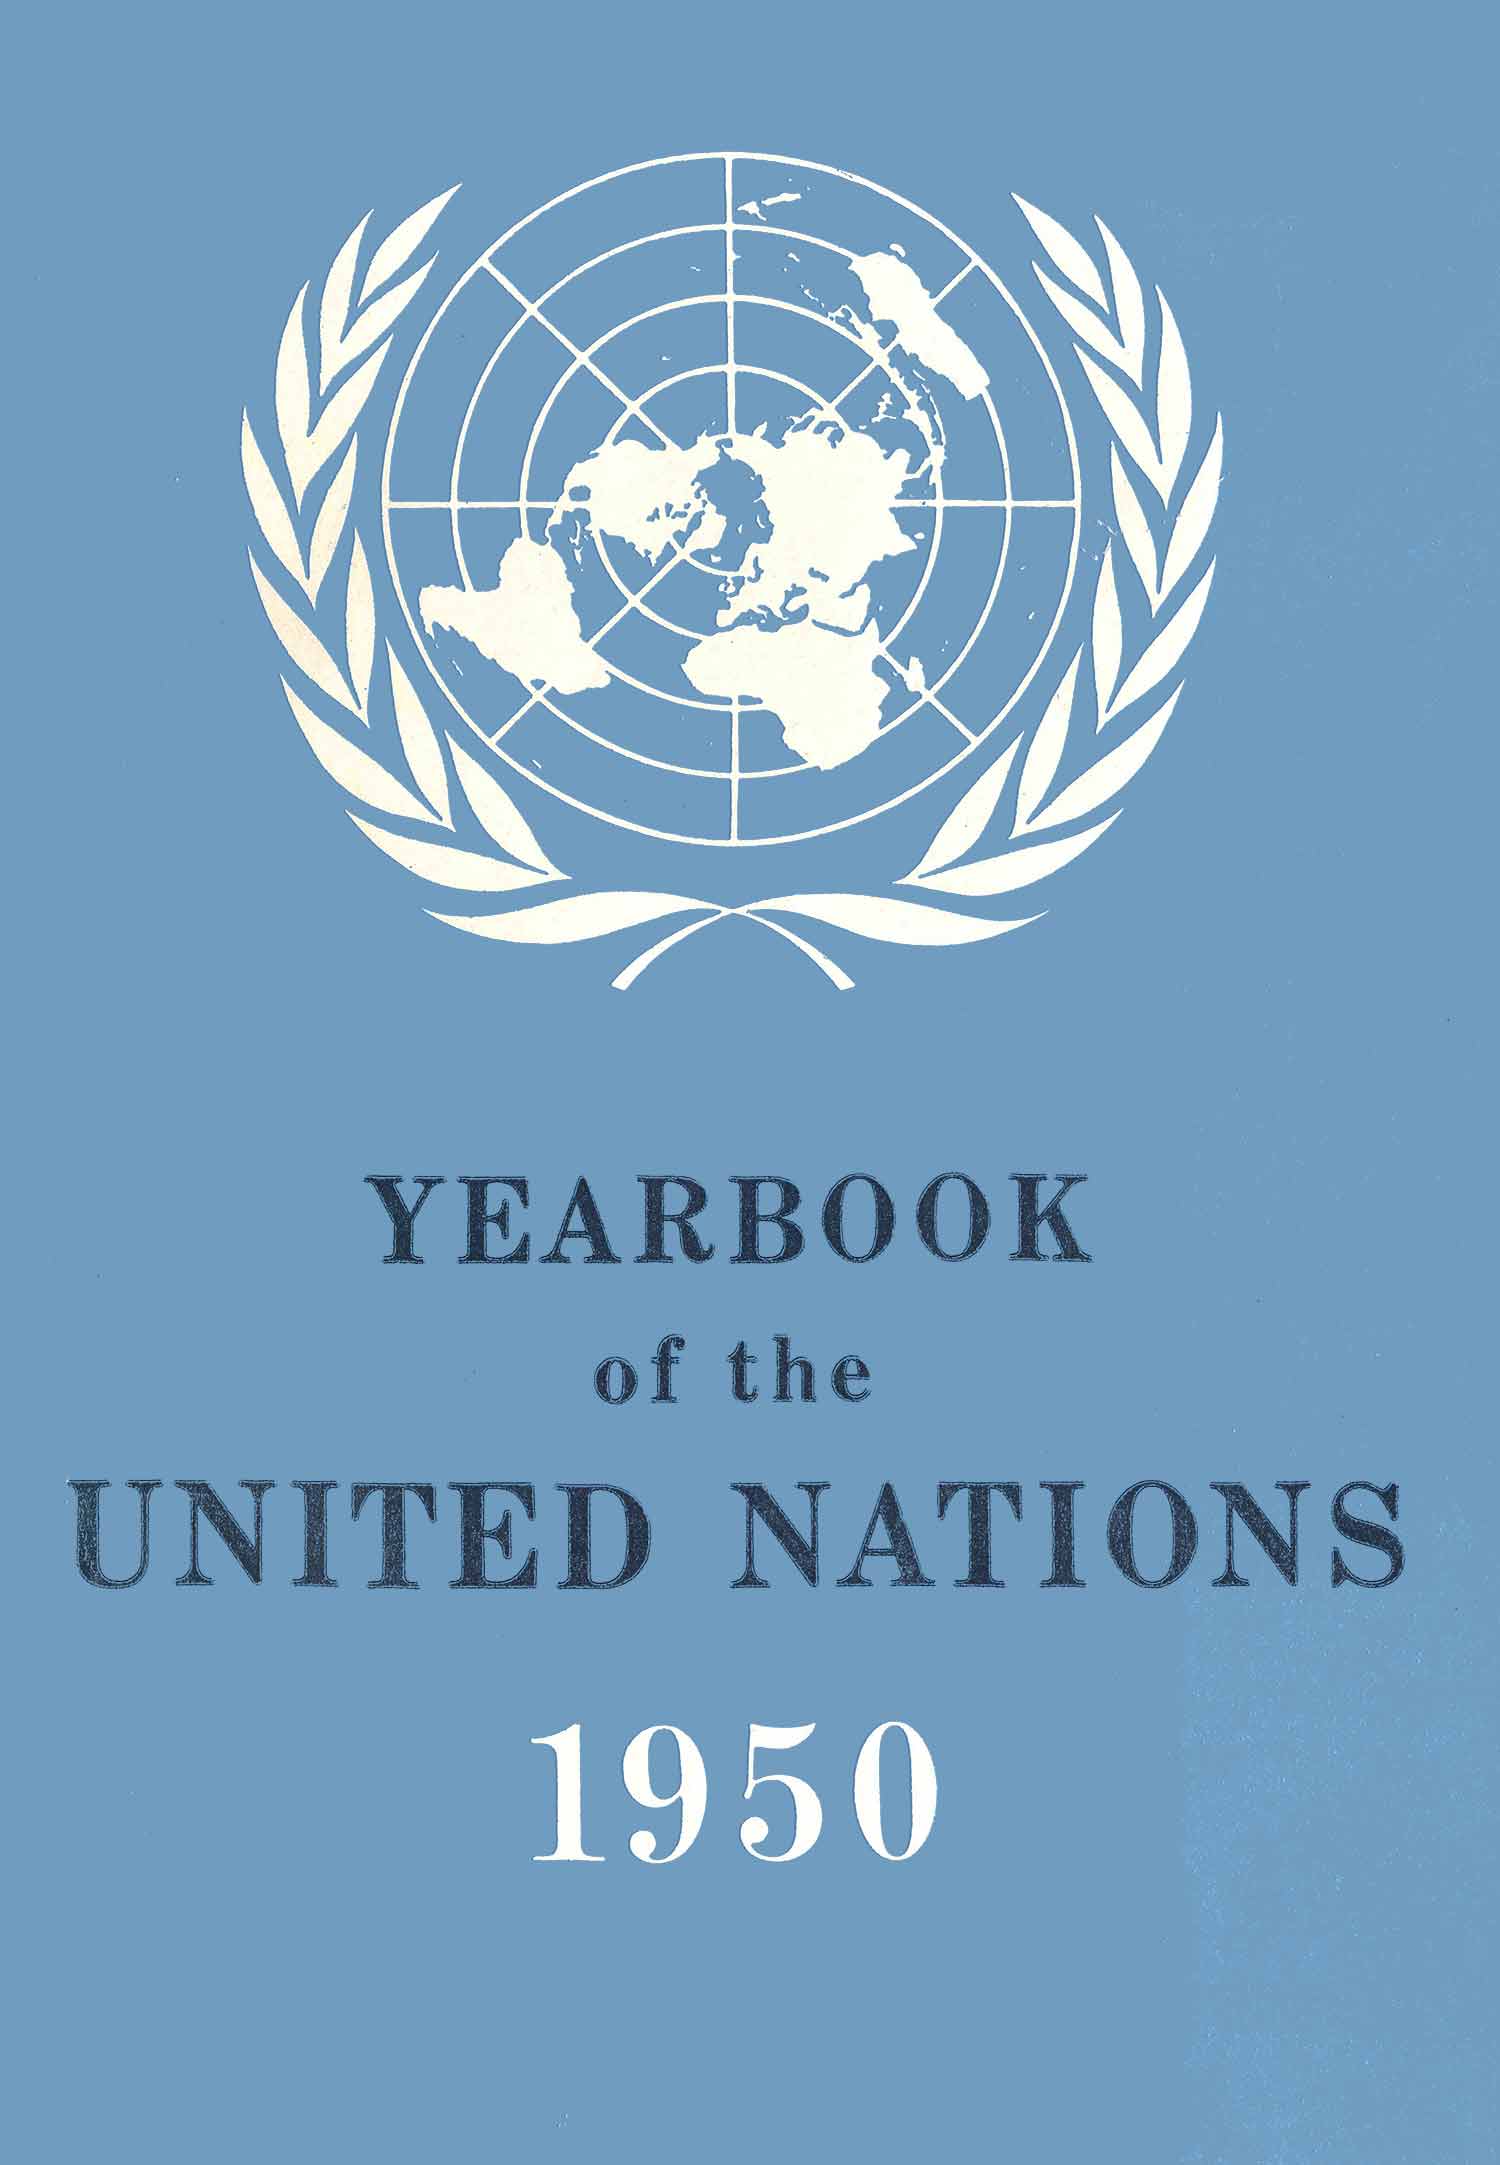 image of Yearbook of the United Nations 1950